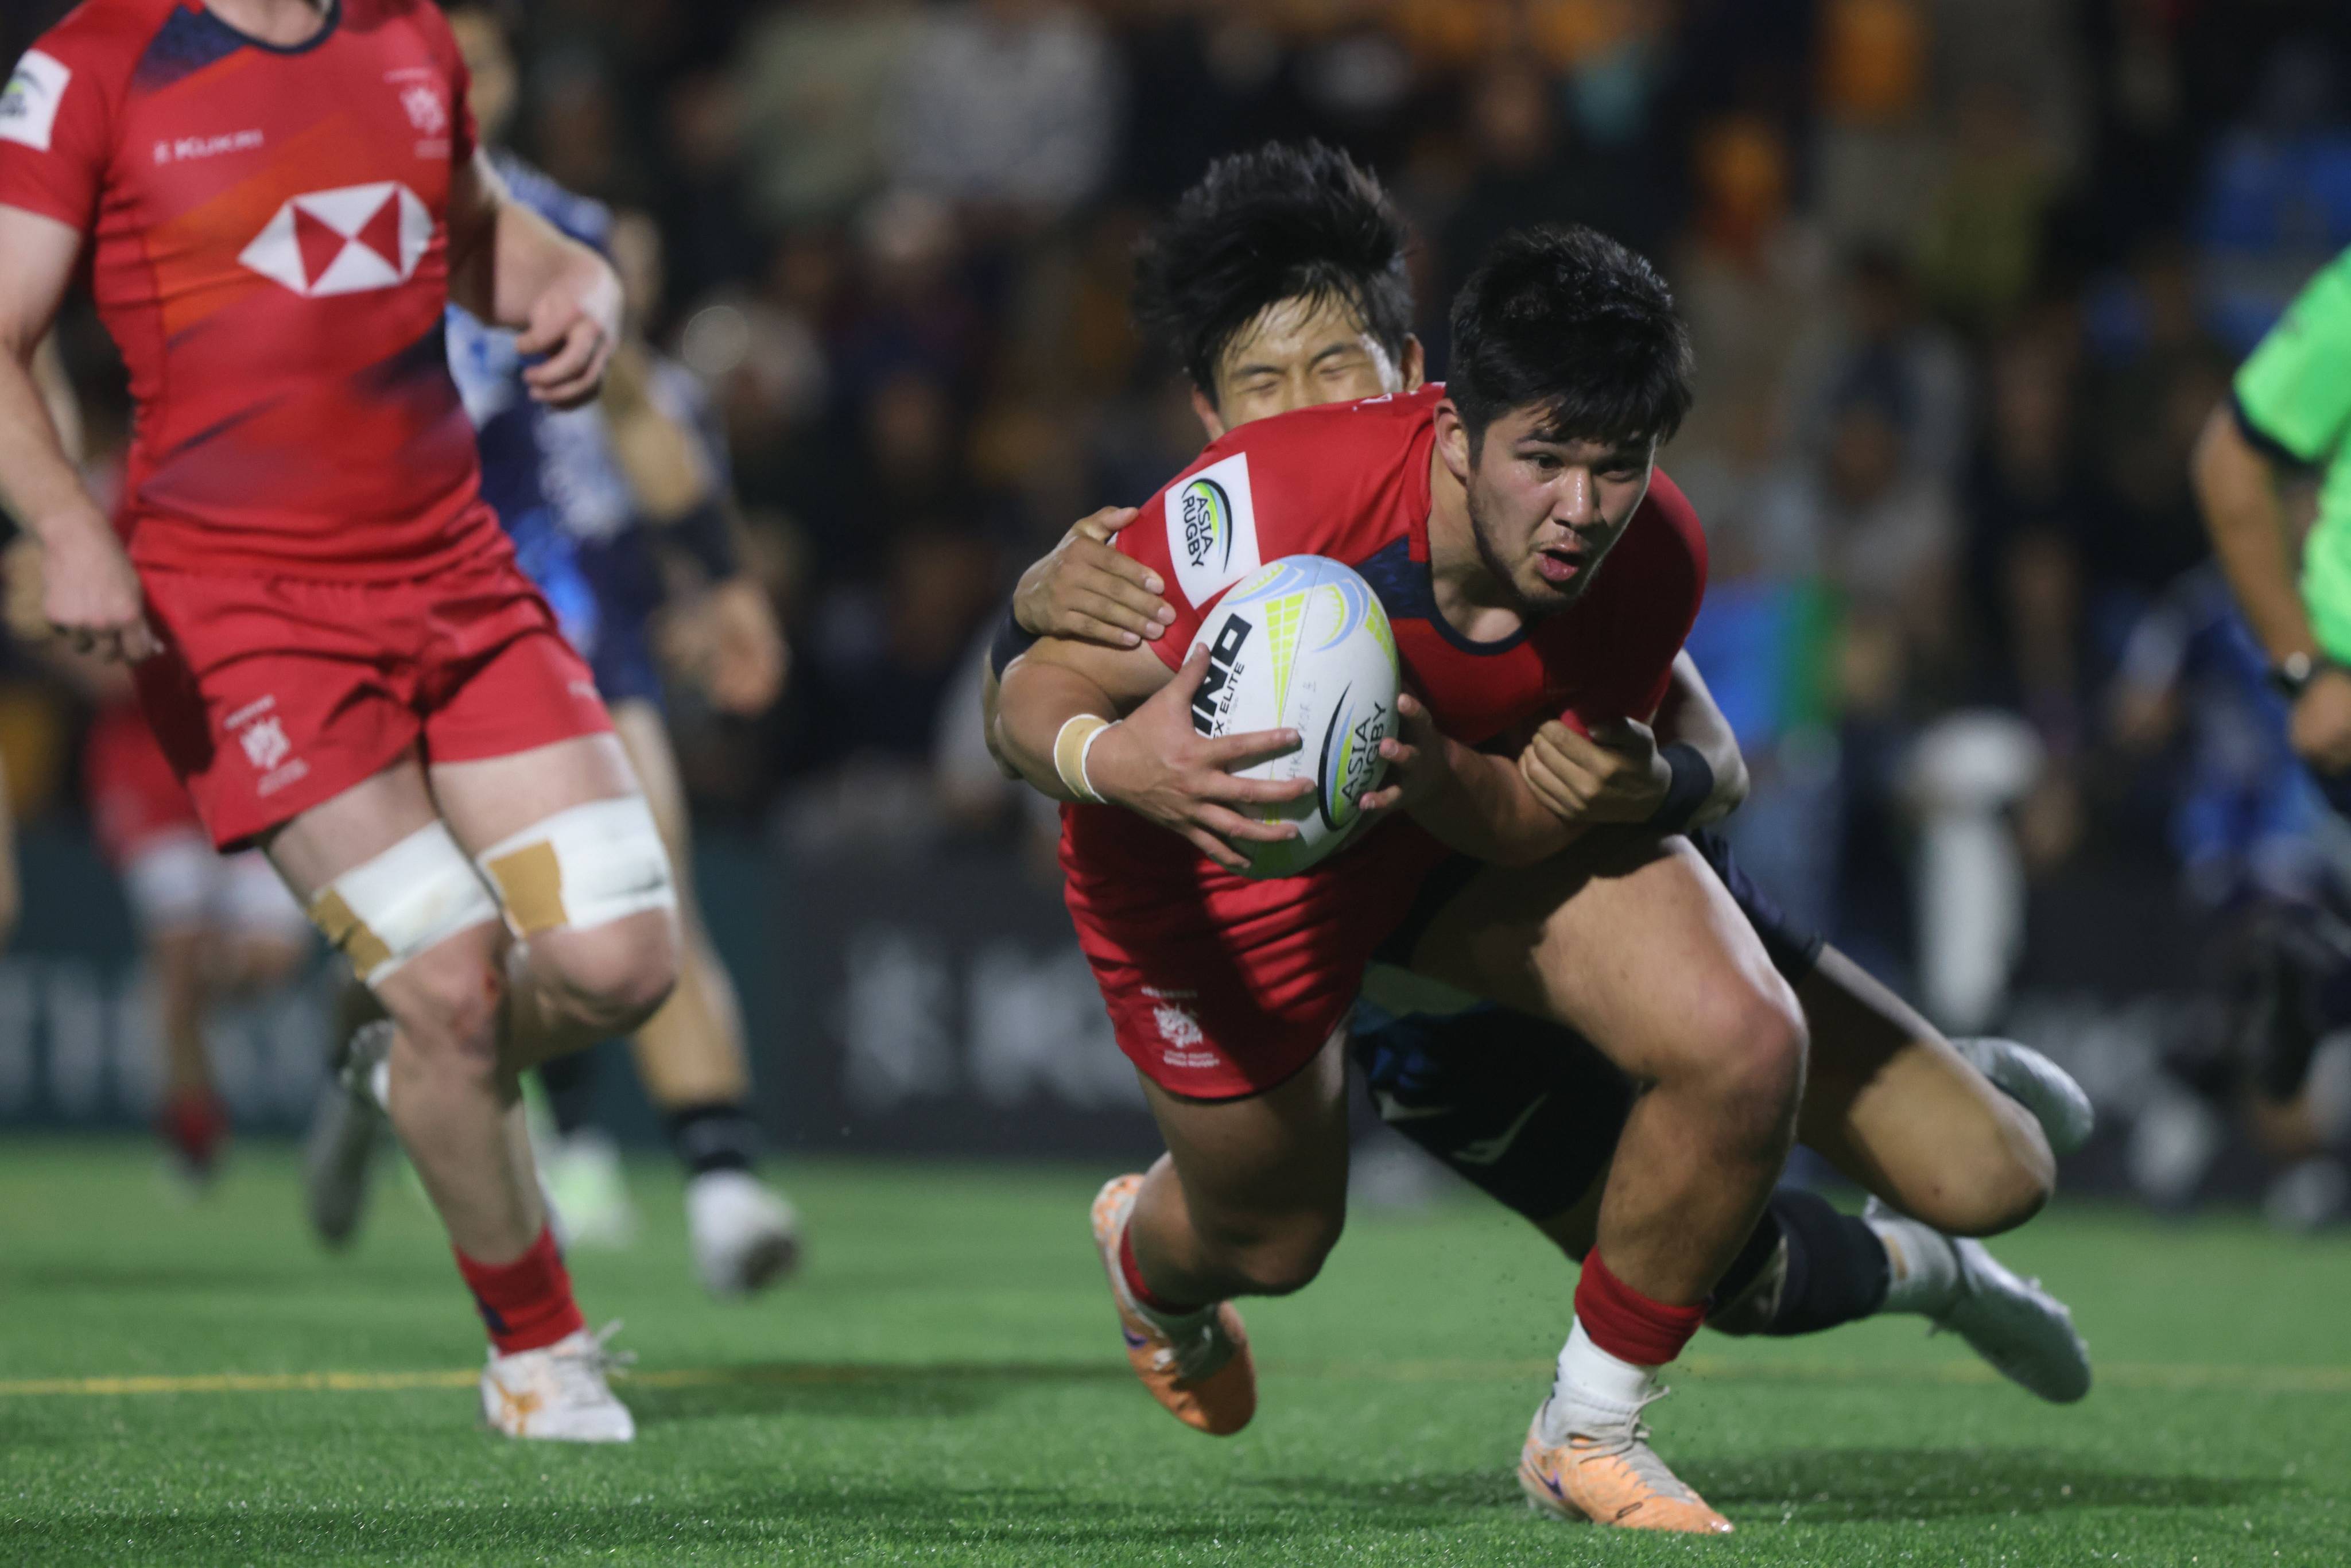 Isaac Campbell-Wu is among the overseas-based players in Hong Kong’s squad for the World Rugby U20 Trophy. Photo: Jonathan Wong